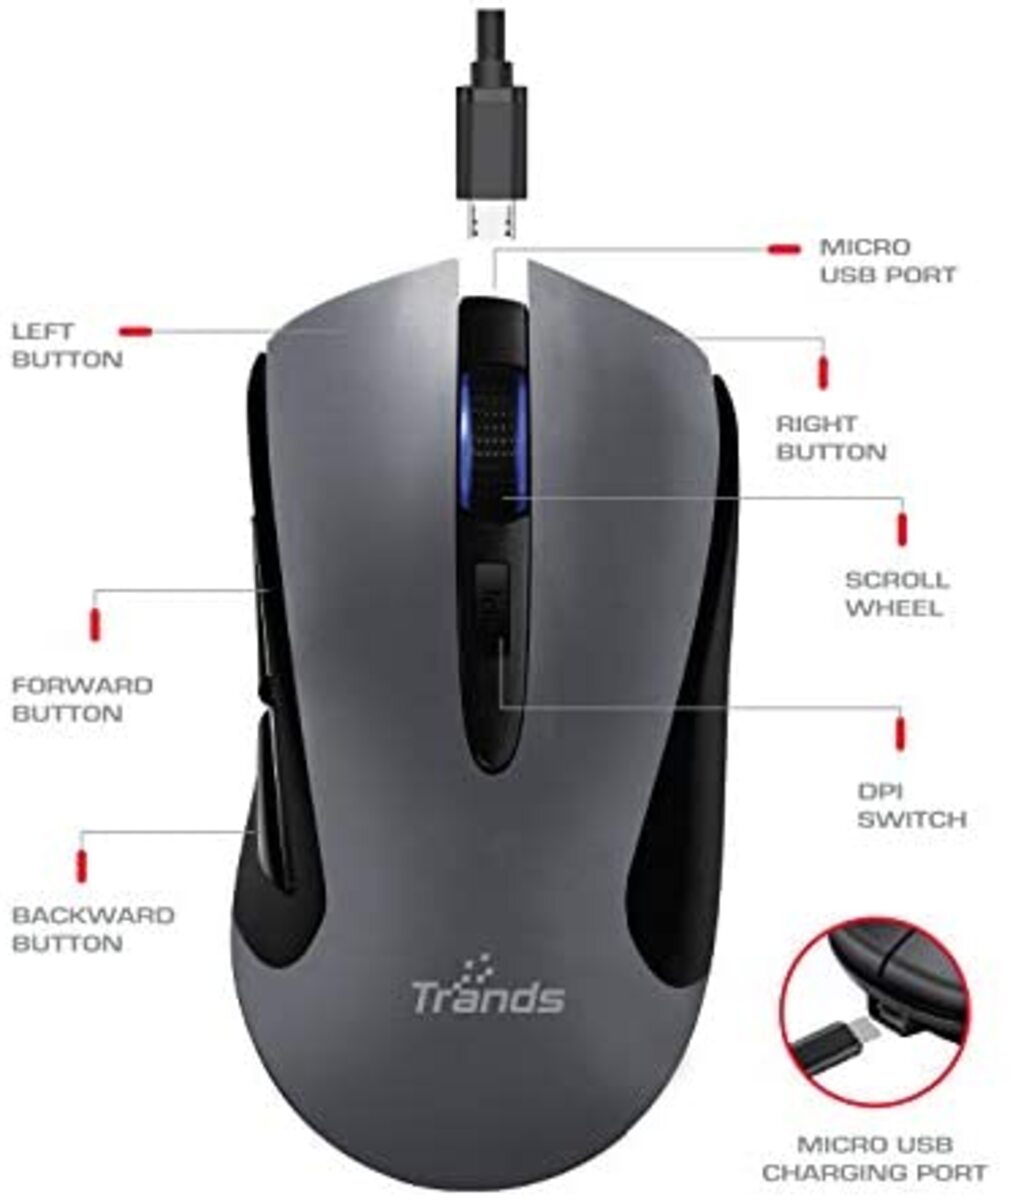 Trands 2.4G Rechargeable Wireless Portable Mouse Optical Mice with USB ...